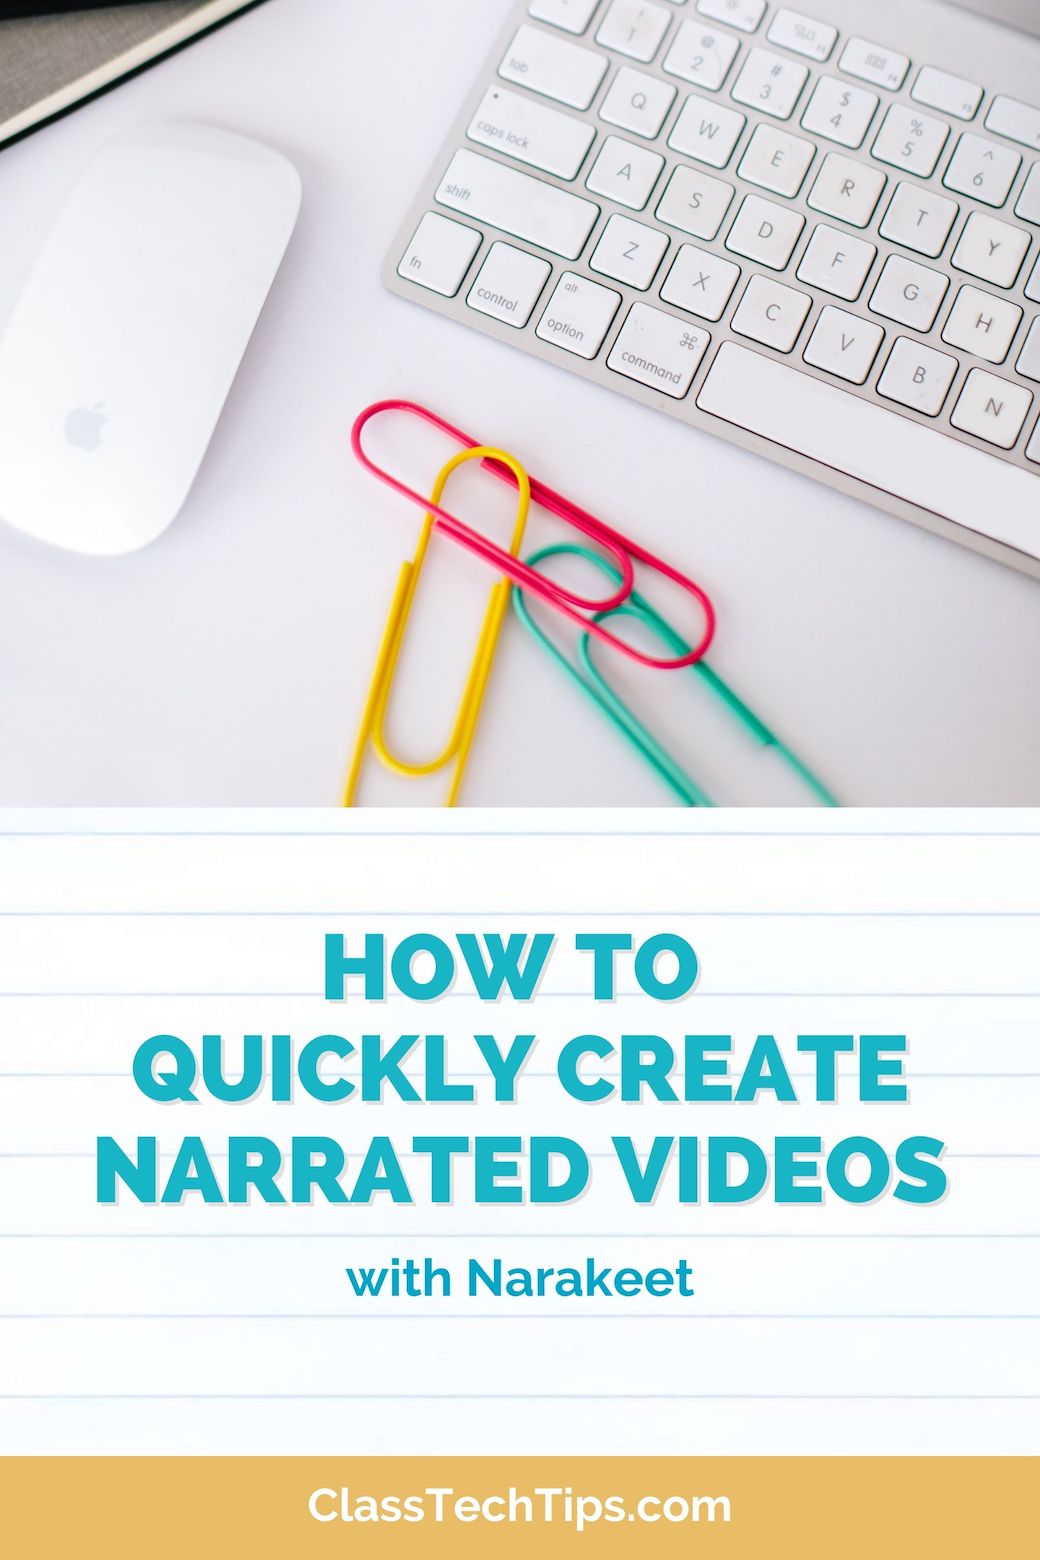 You can quickly create narrated videos to share with students, colleagues, and families using Narakeet to transform your slide decks.